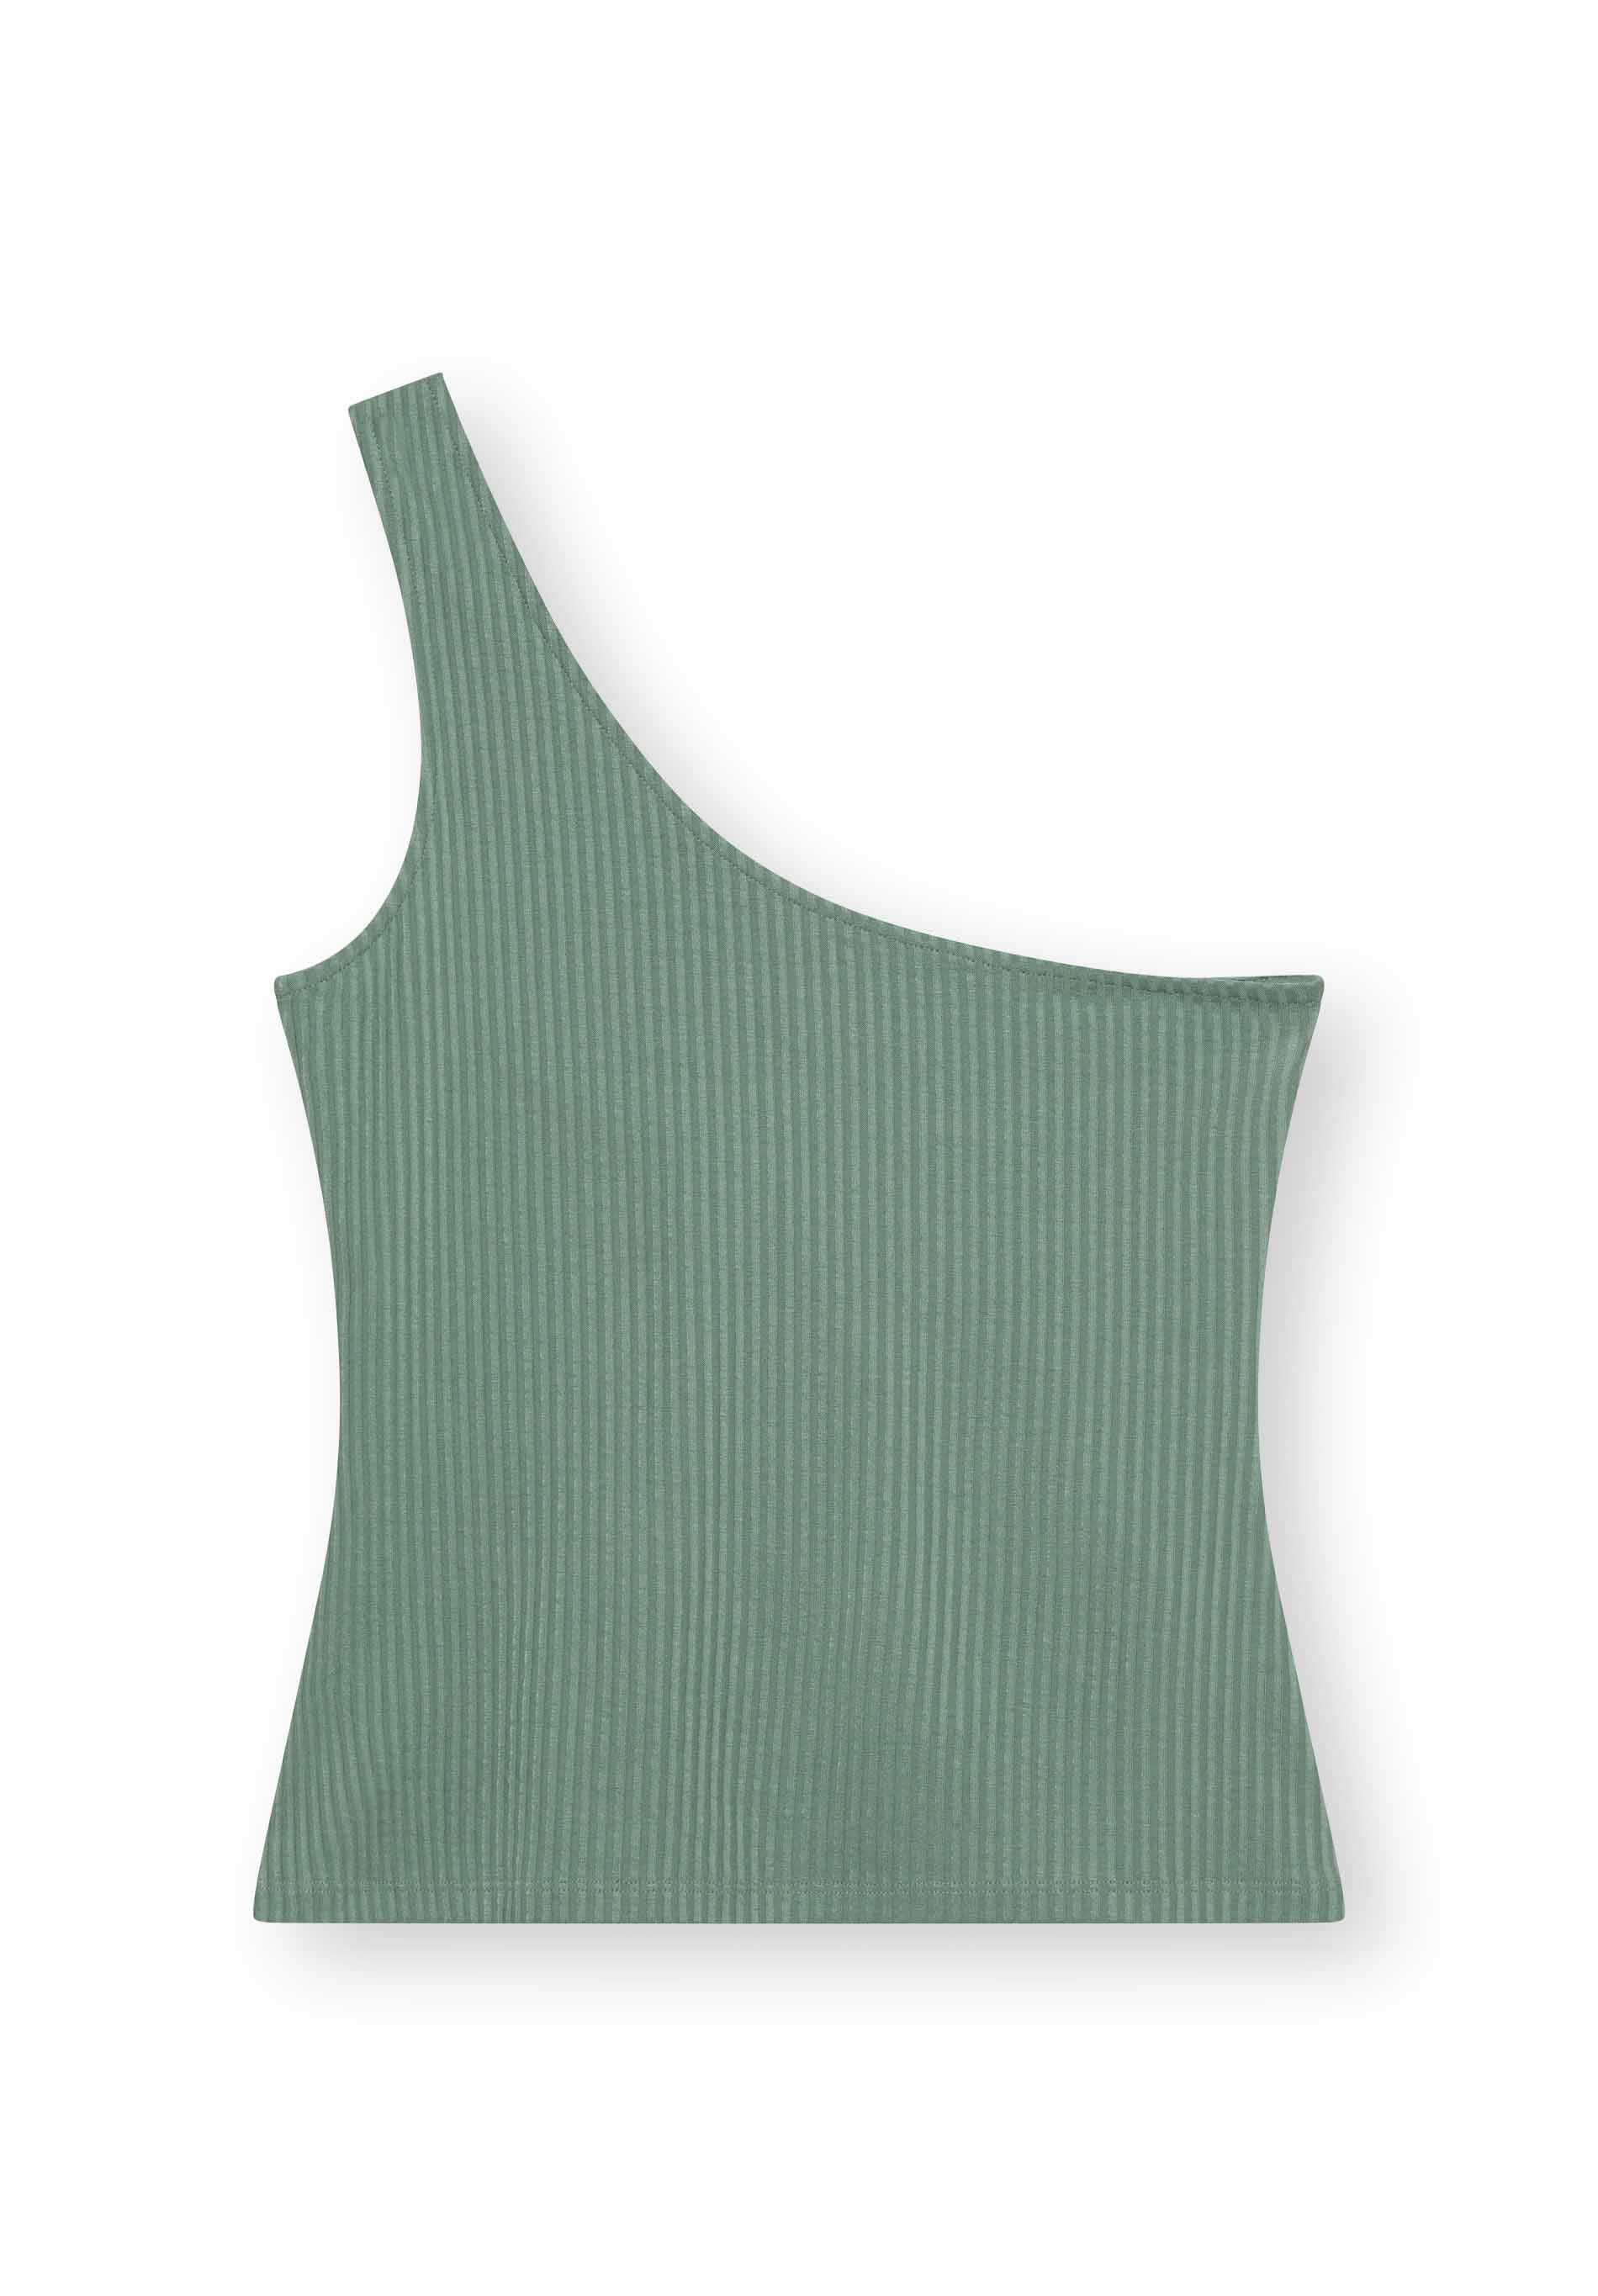 Top FLABELA in green by LOVJOI made of TENCEL™